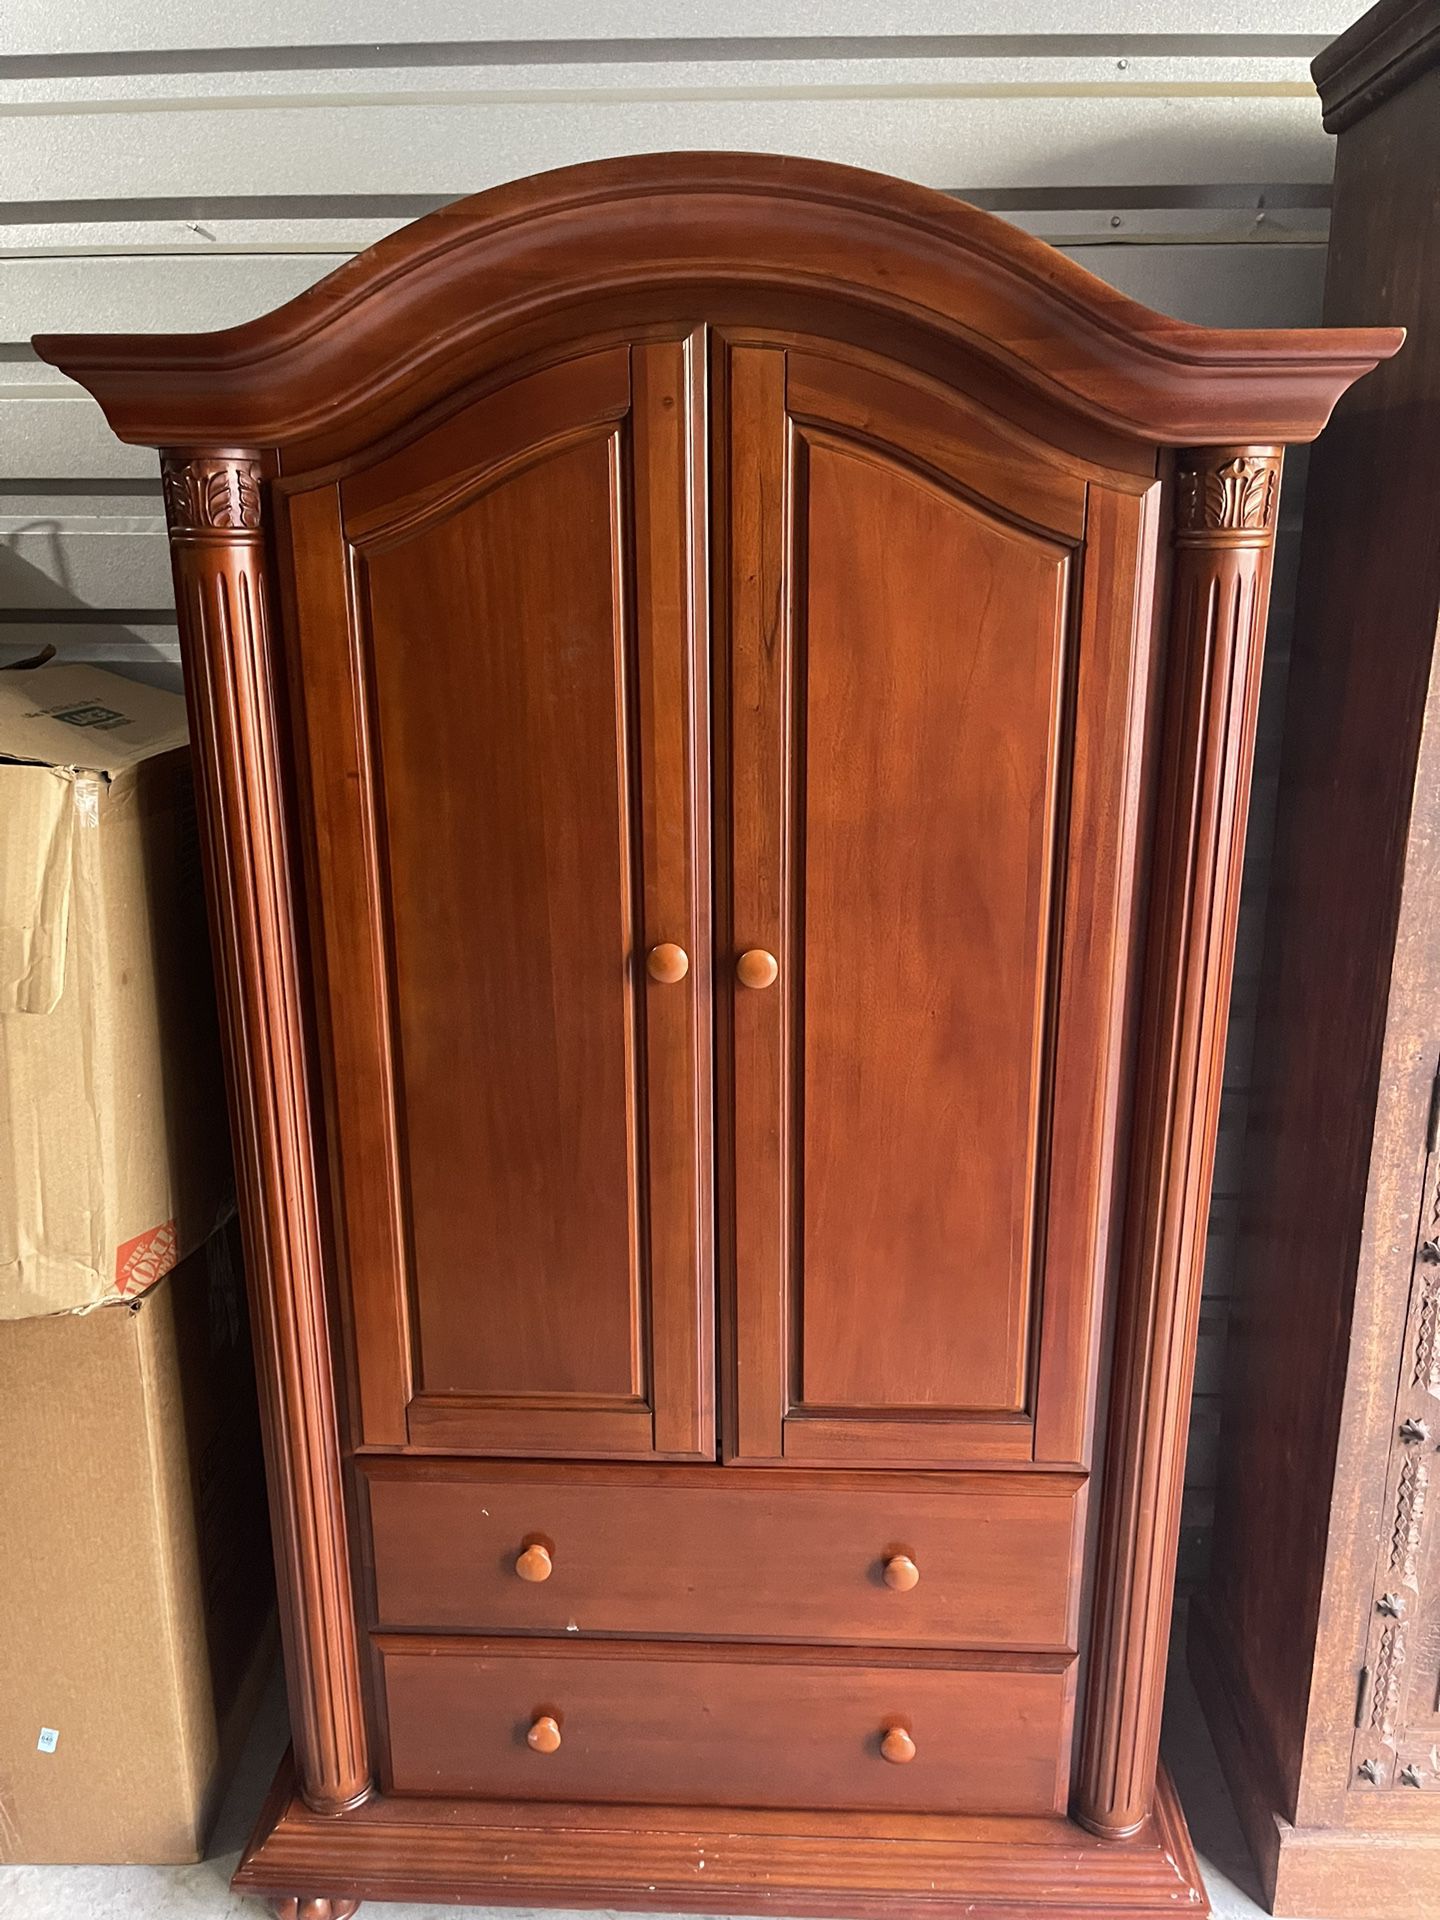  Beautiful Cache Mahogany Armoire - Amazing Condition- ONLY $30